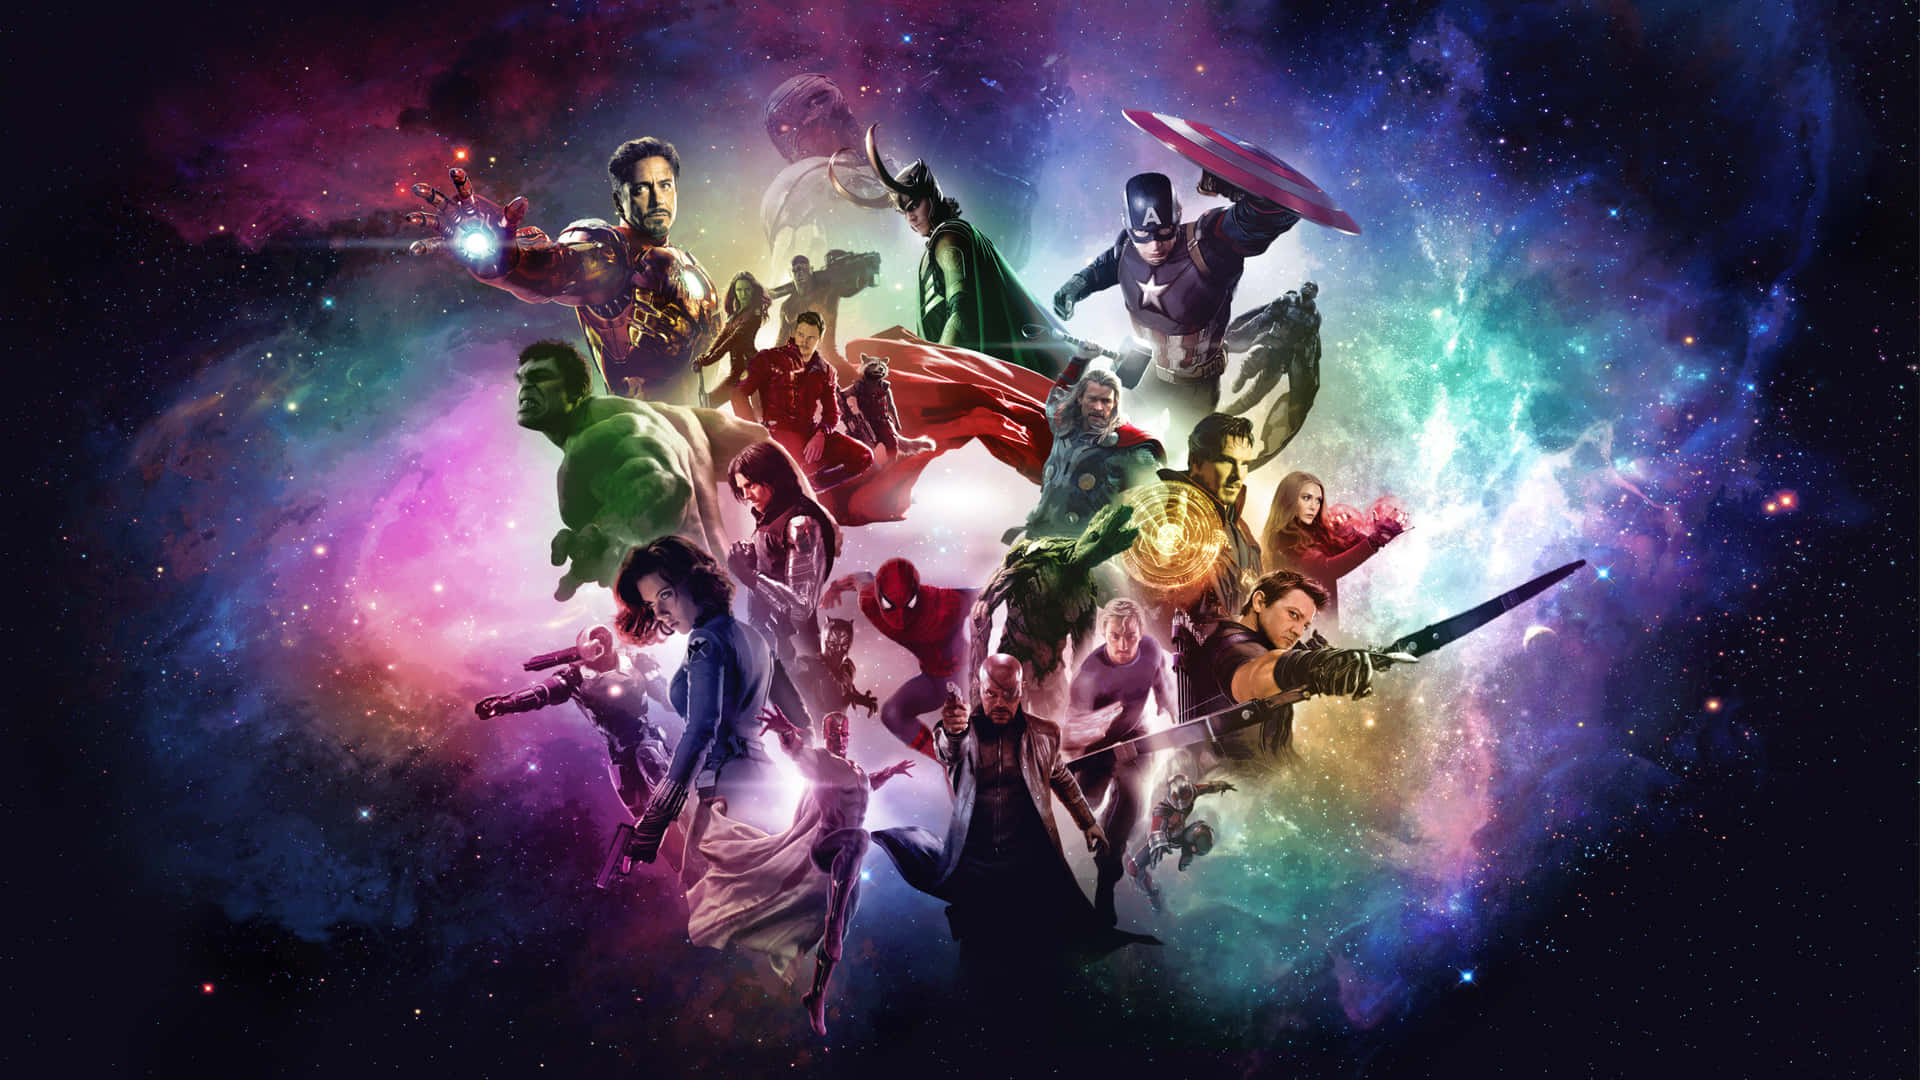 "The Earth's Mightiest Heroes Team Up" Wallpaper